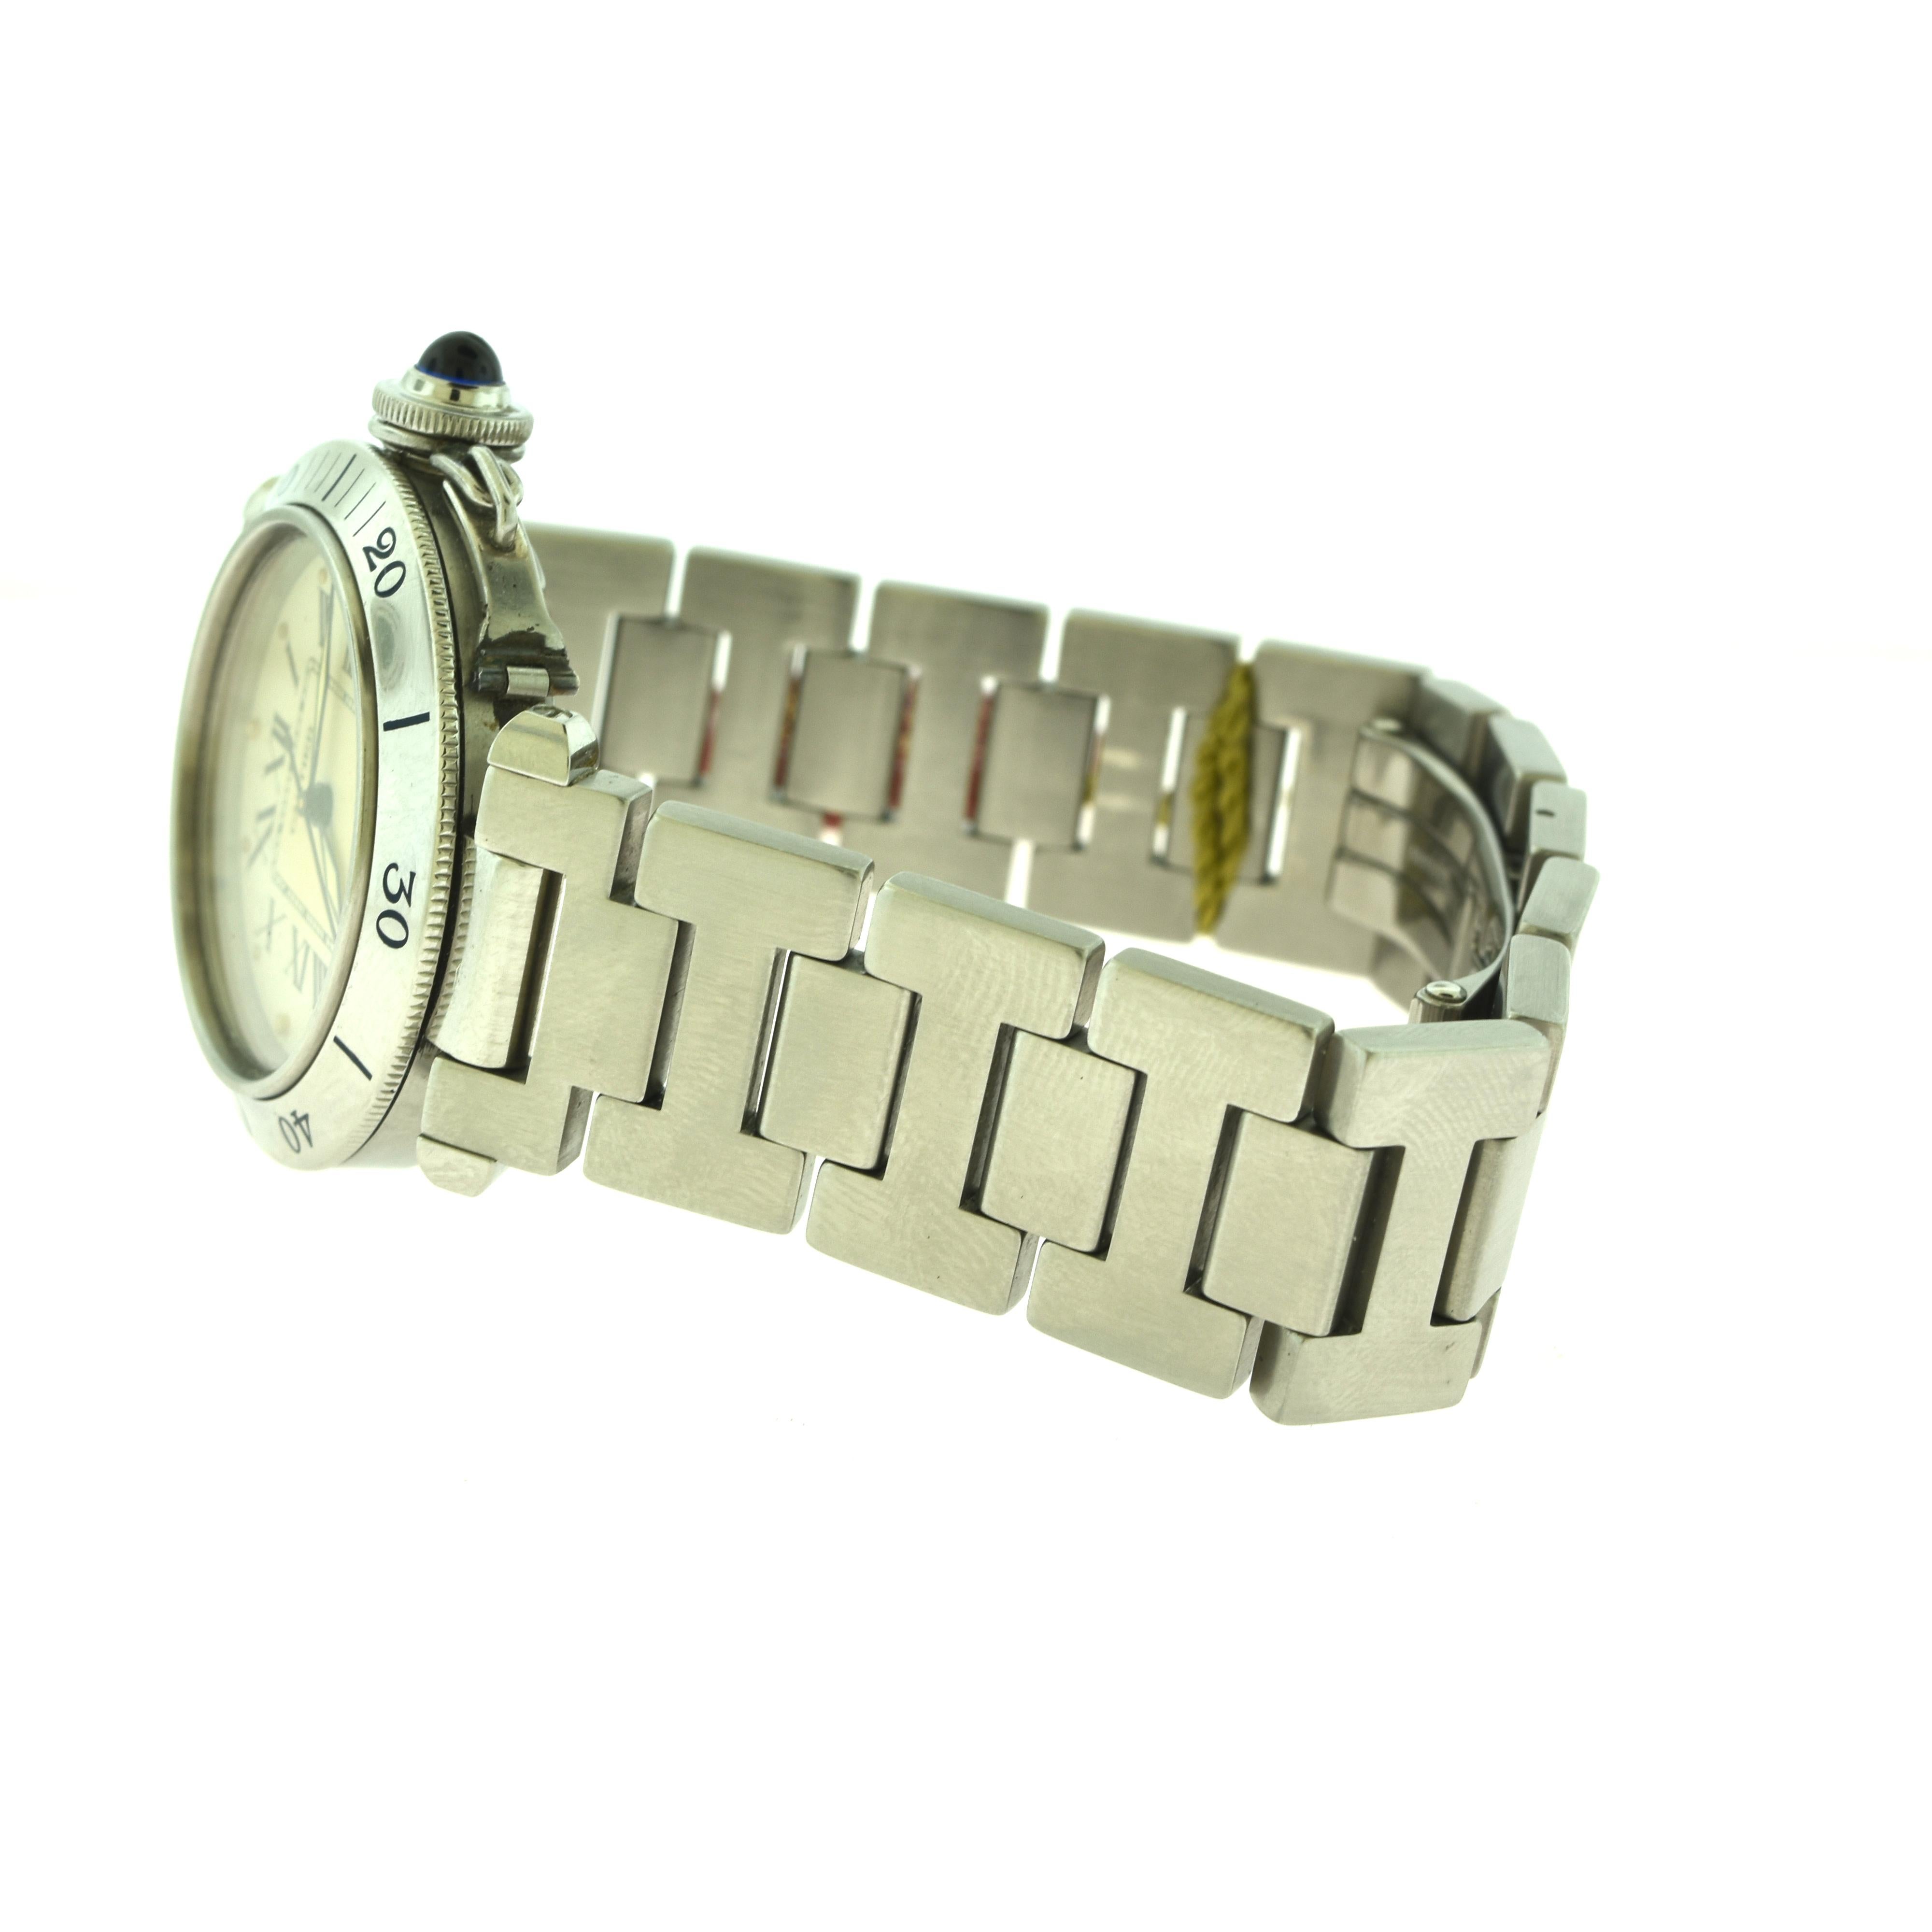 Brilliance Jewels, Miami
Questions? Call Us Anytime!
786,482,8100

Brand: Cartier

Model: Pasha 

Reference: 1030 1 

Movement: Automatic

Case Size: 35 mm 

Case Material: Stainless Steel 

Bracelet Material: Stainless Steel 

Crystal: